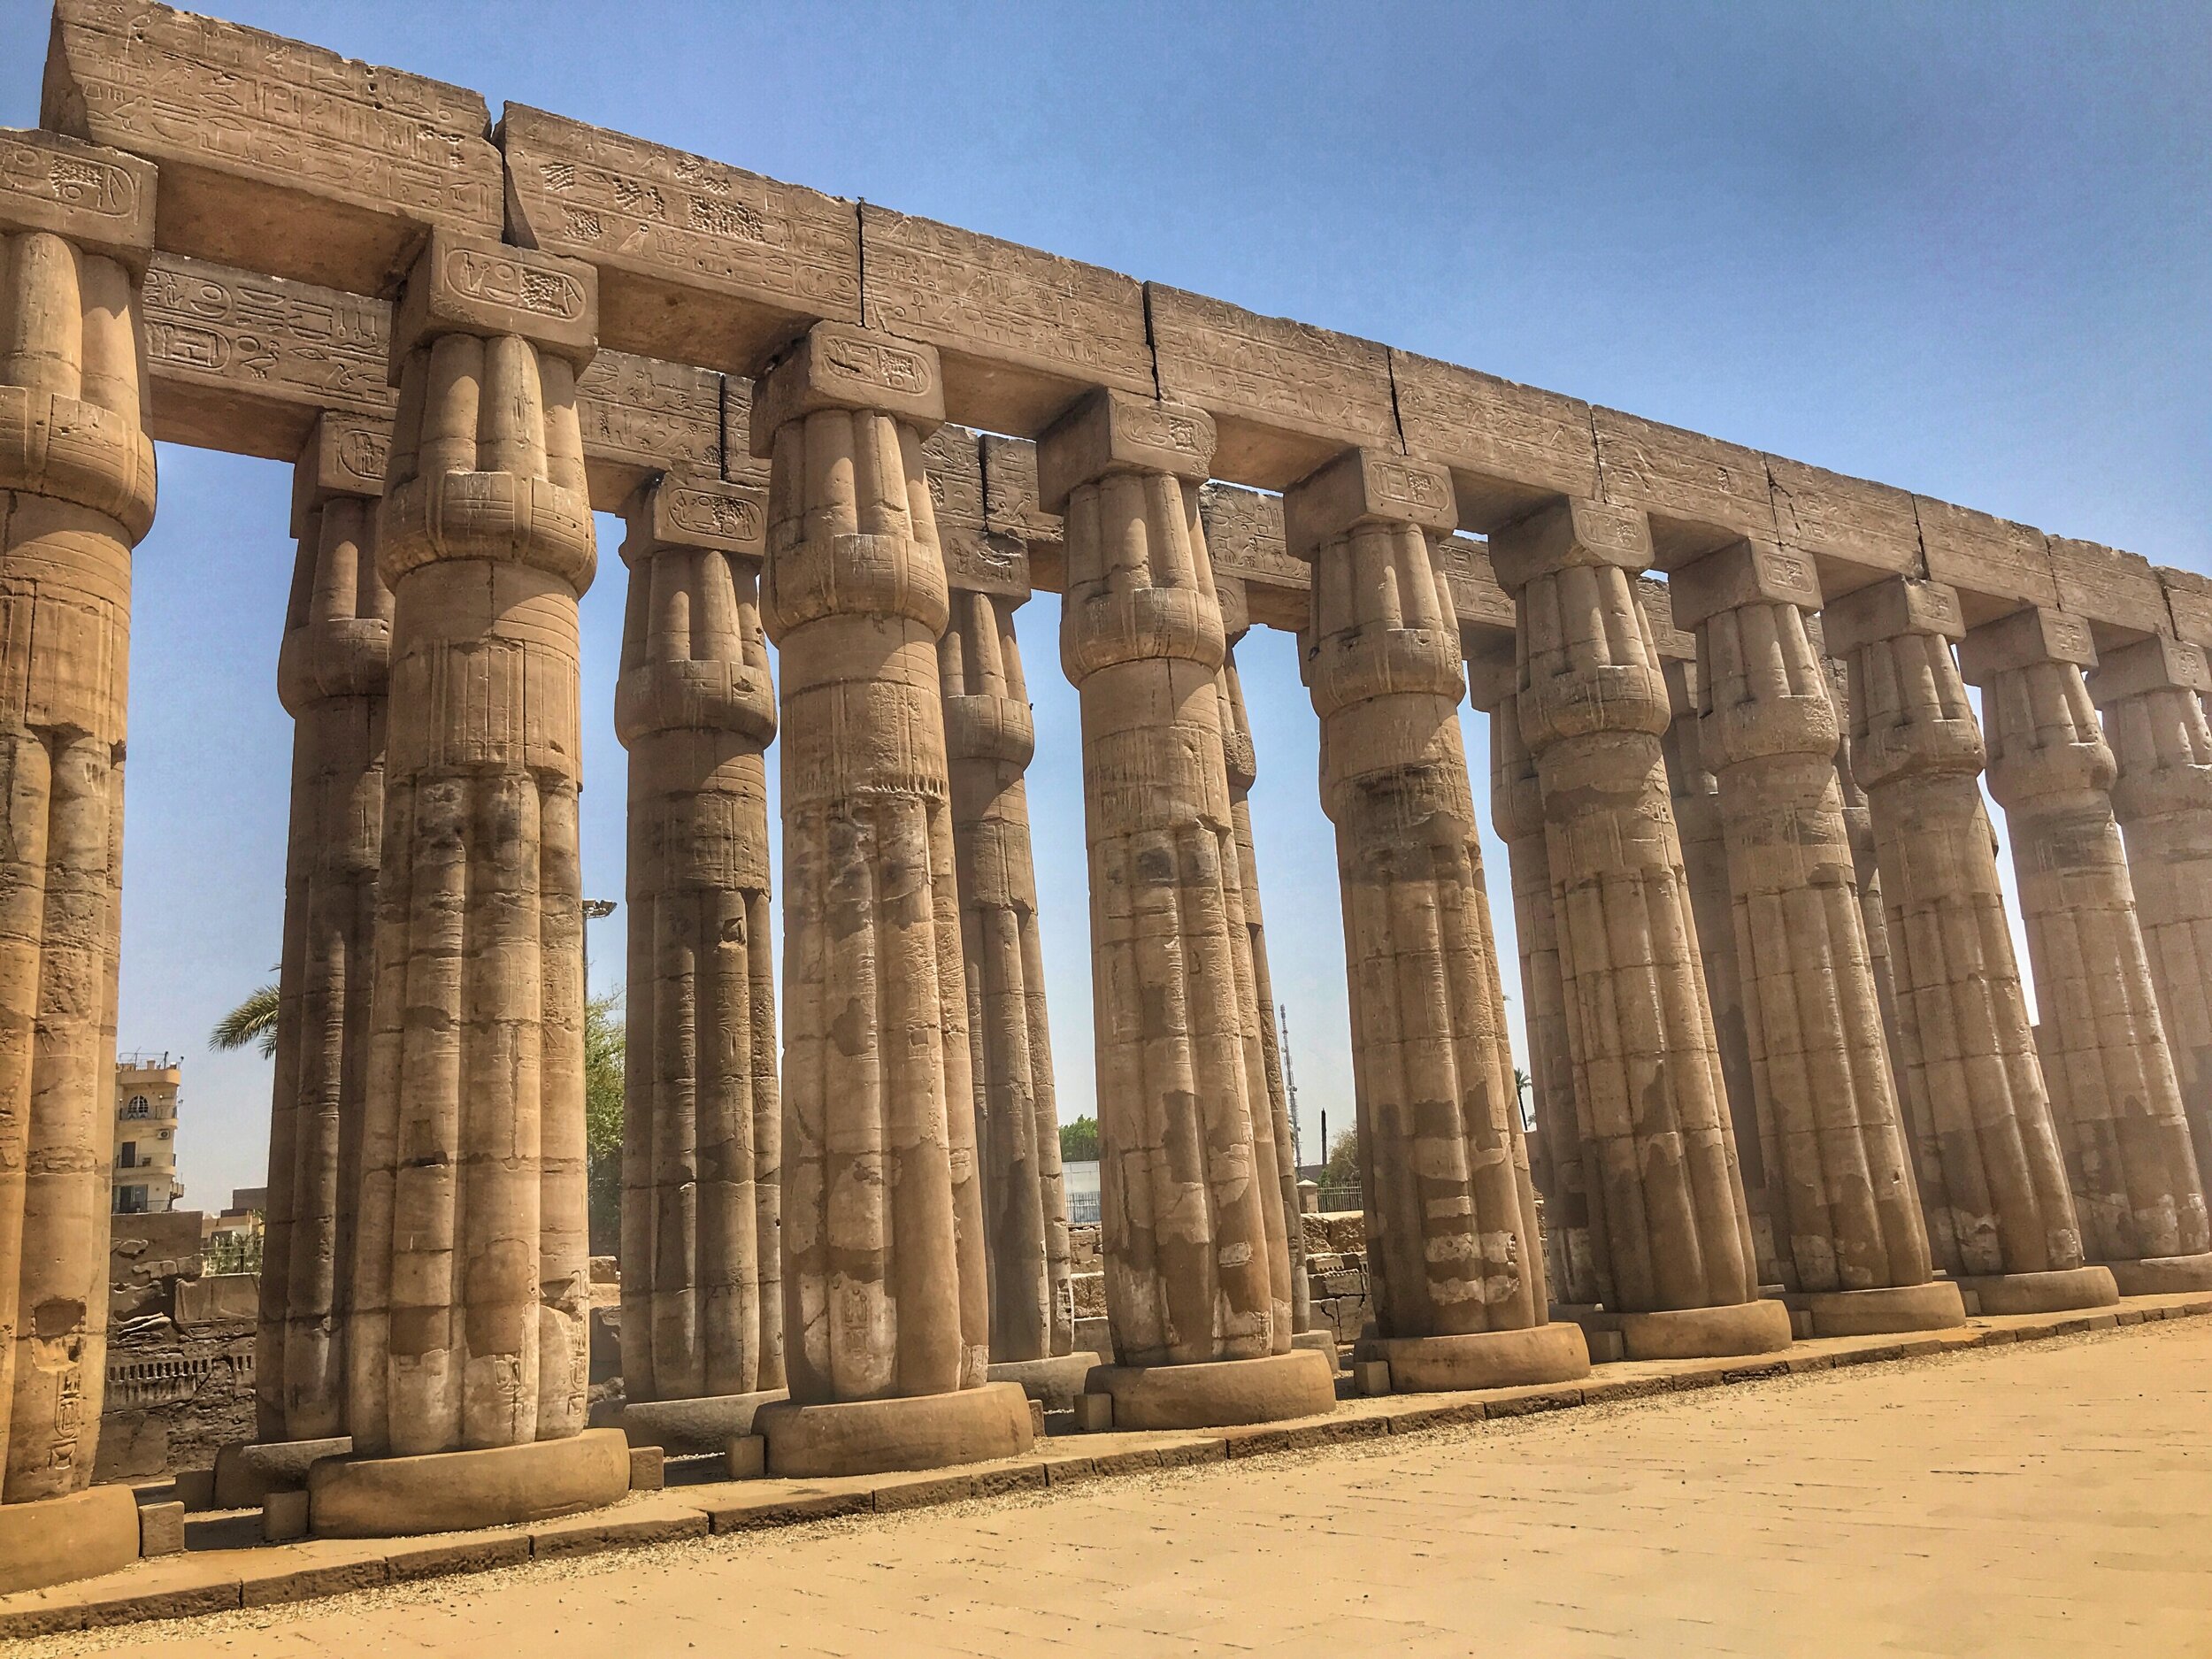 The Colonnade at Luxor Temple